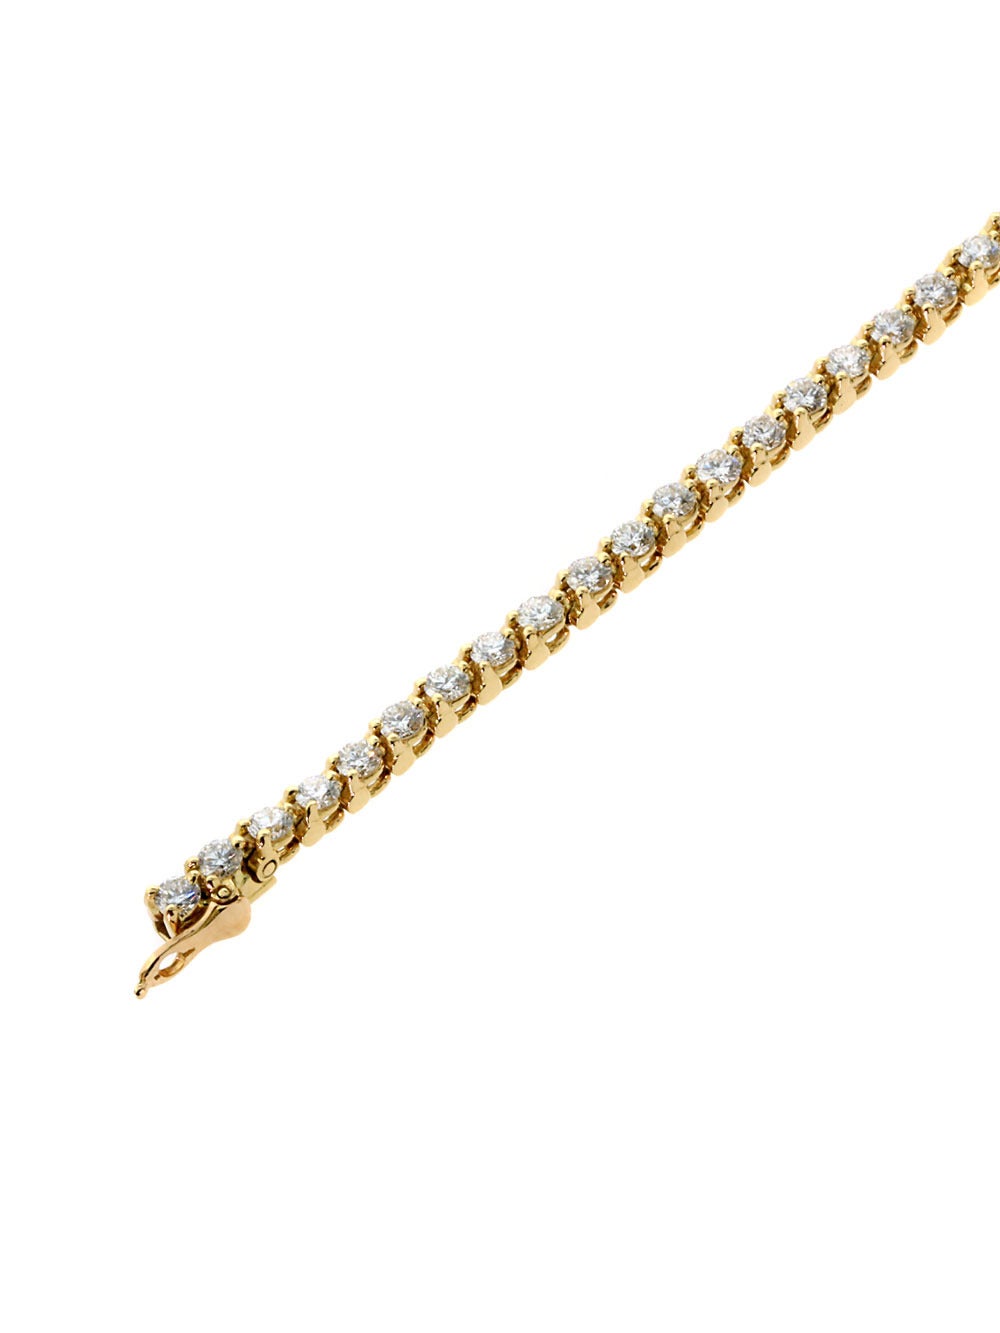 A fabulous addition to any wardrobe, this magnificent authentic Cartier tennis bracelet is the perfect piece for everyday wear set with the finest Cartier round brilliant cut diamonds weighing a total of 3.18 carats set in 18k yellow